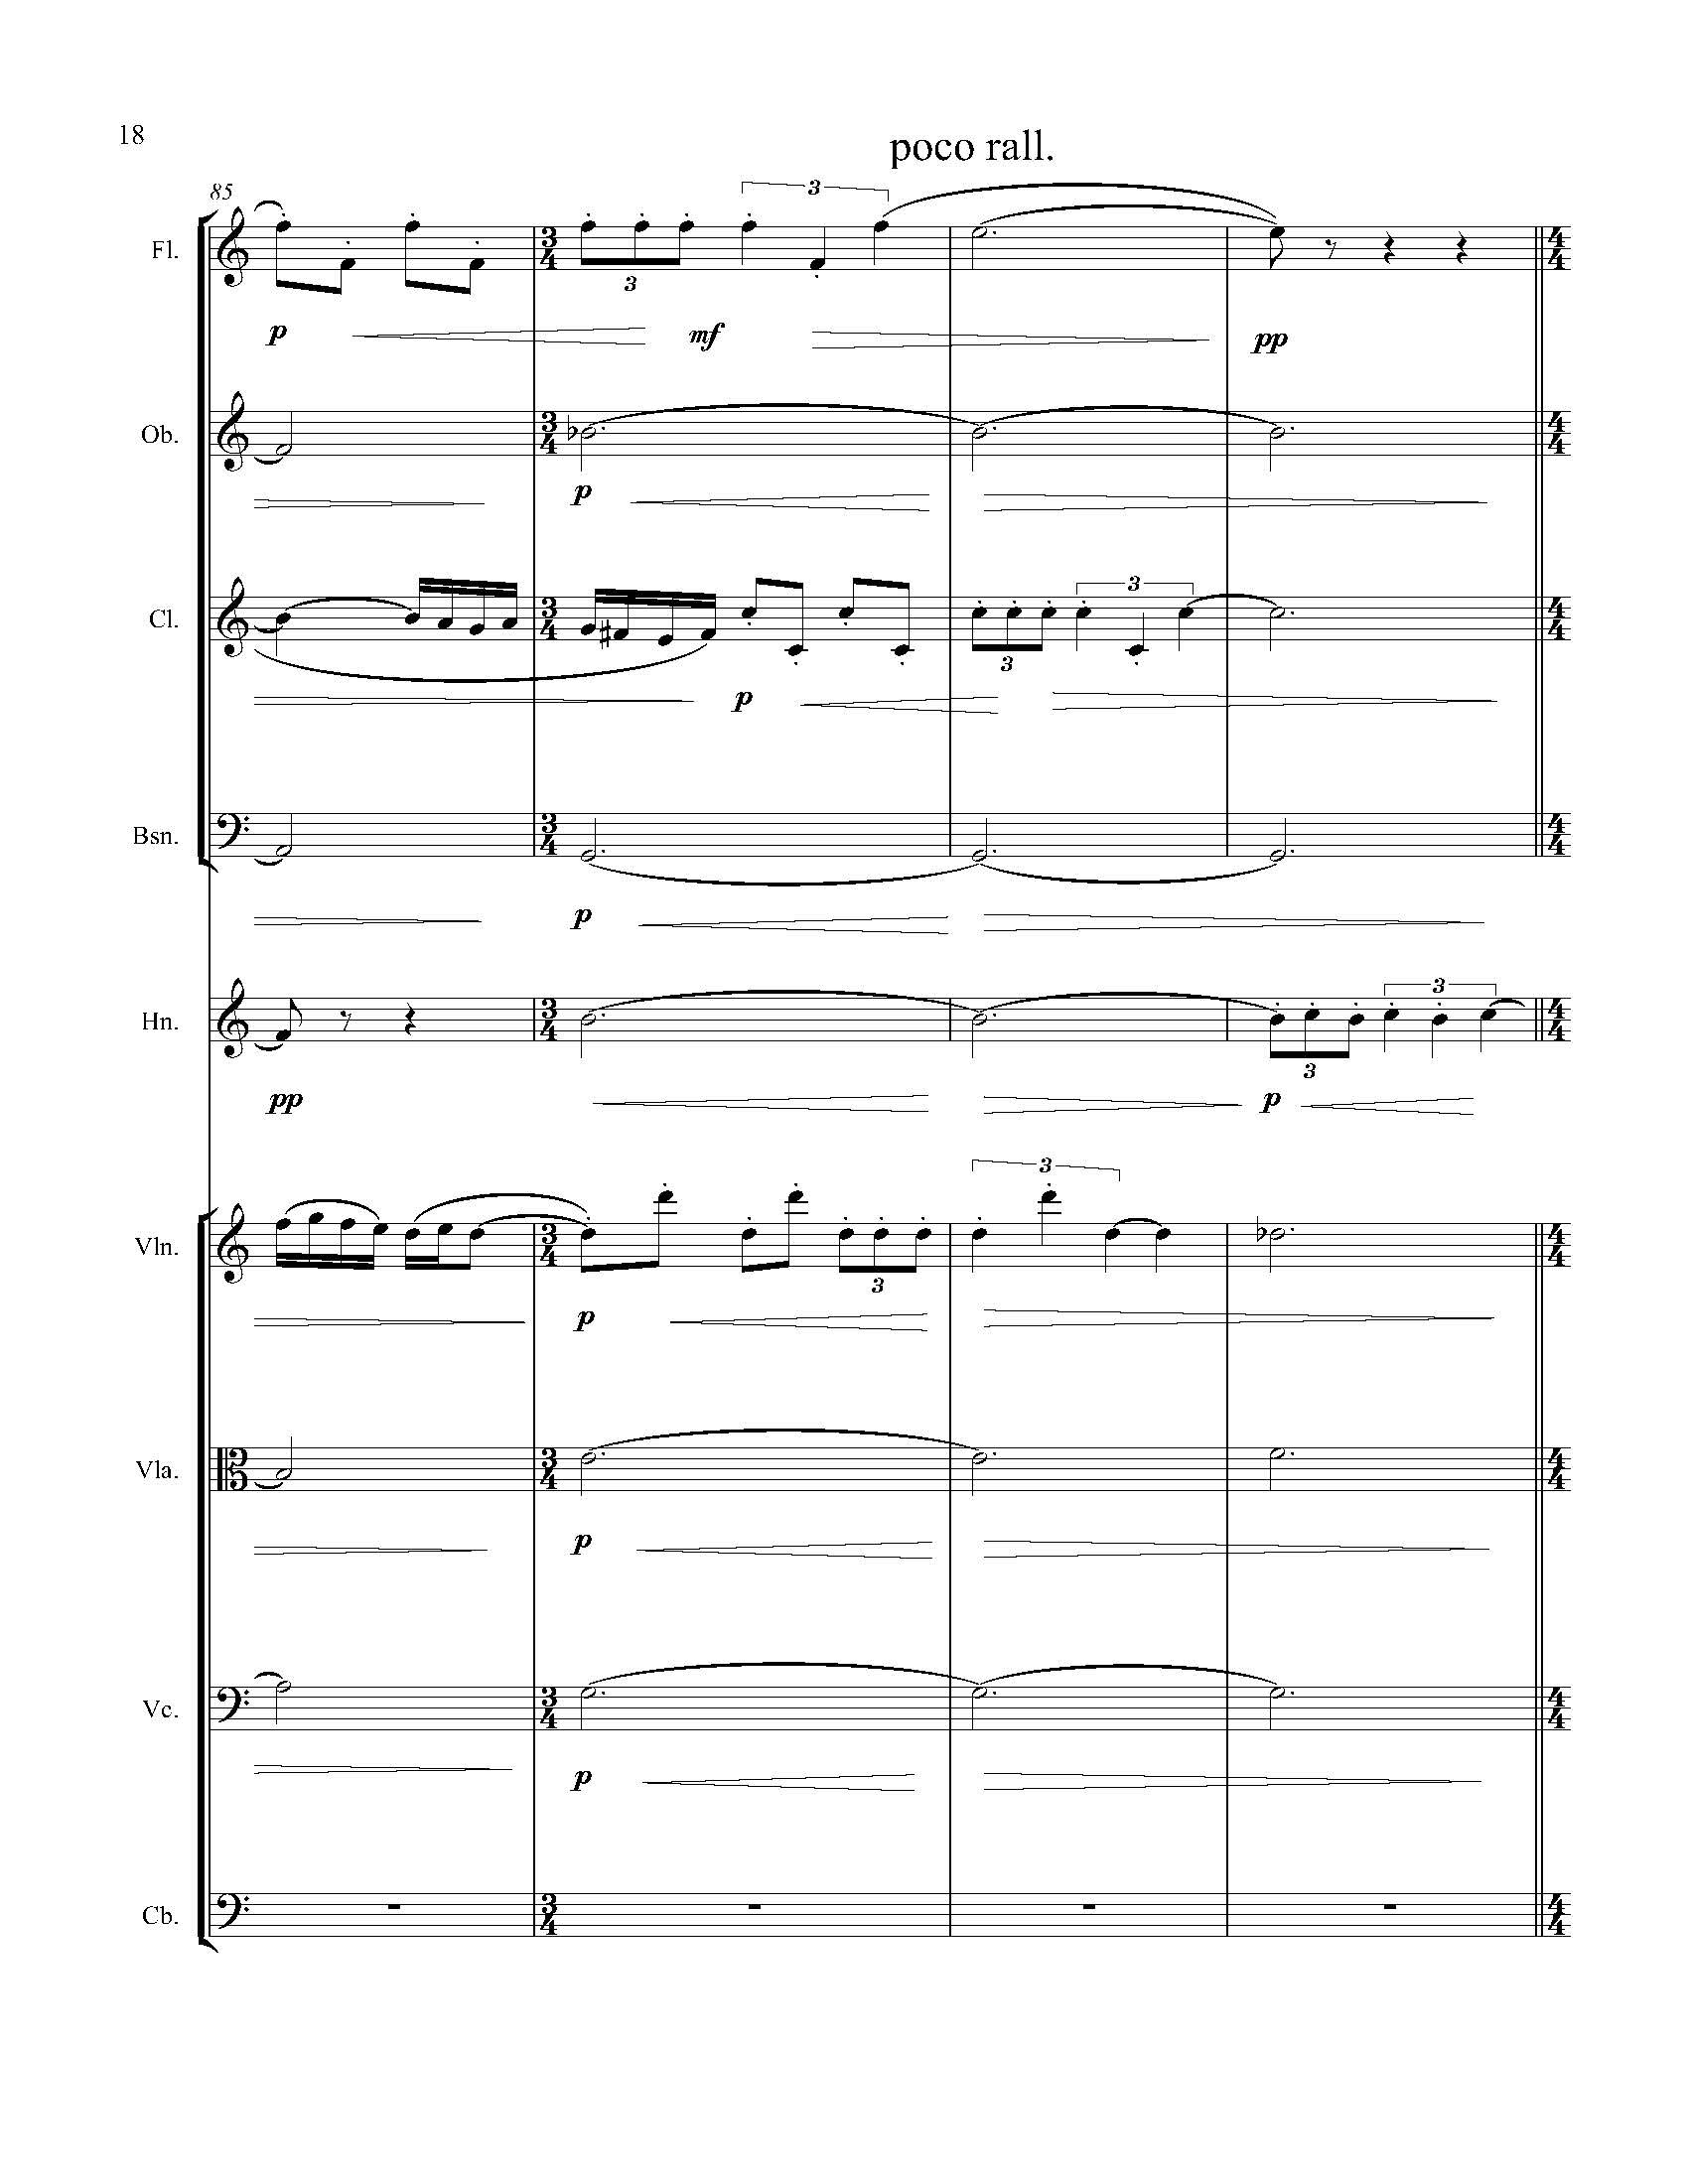 In Search of a Bird - Complete Score_Page_24.jpg